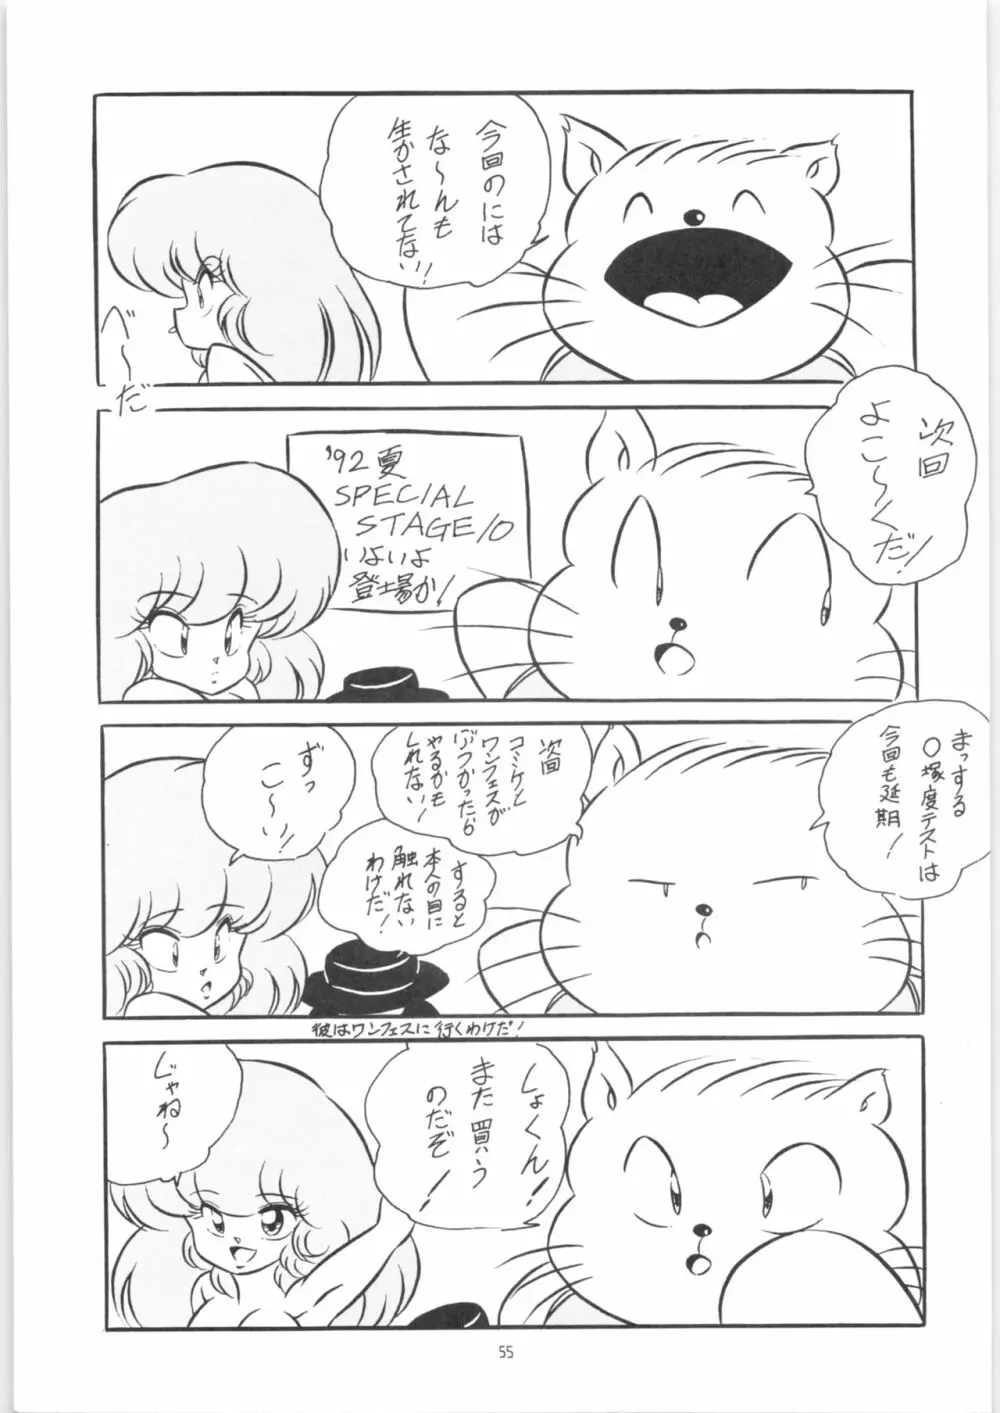 C-COMPANY SPECIAL STAGE 09 Page.55